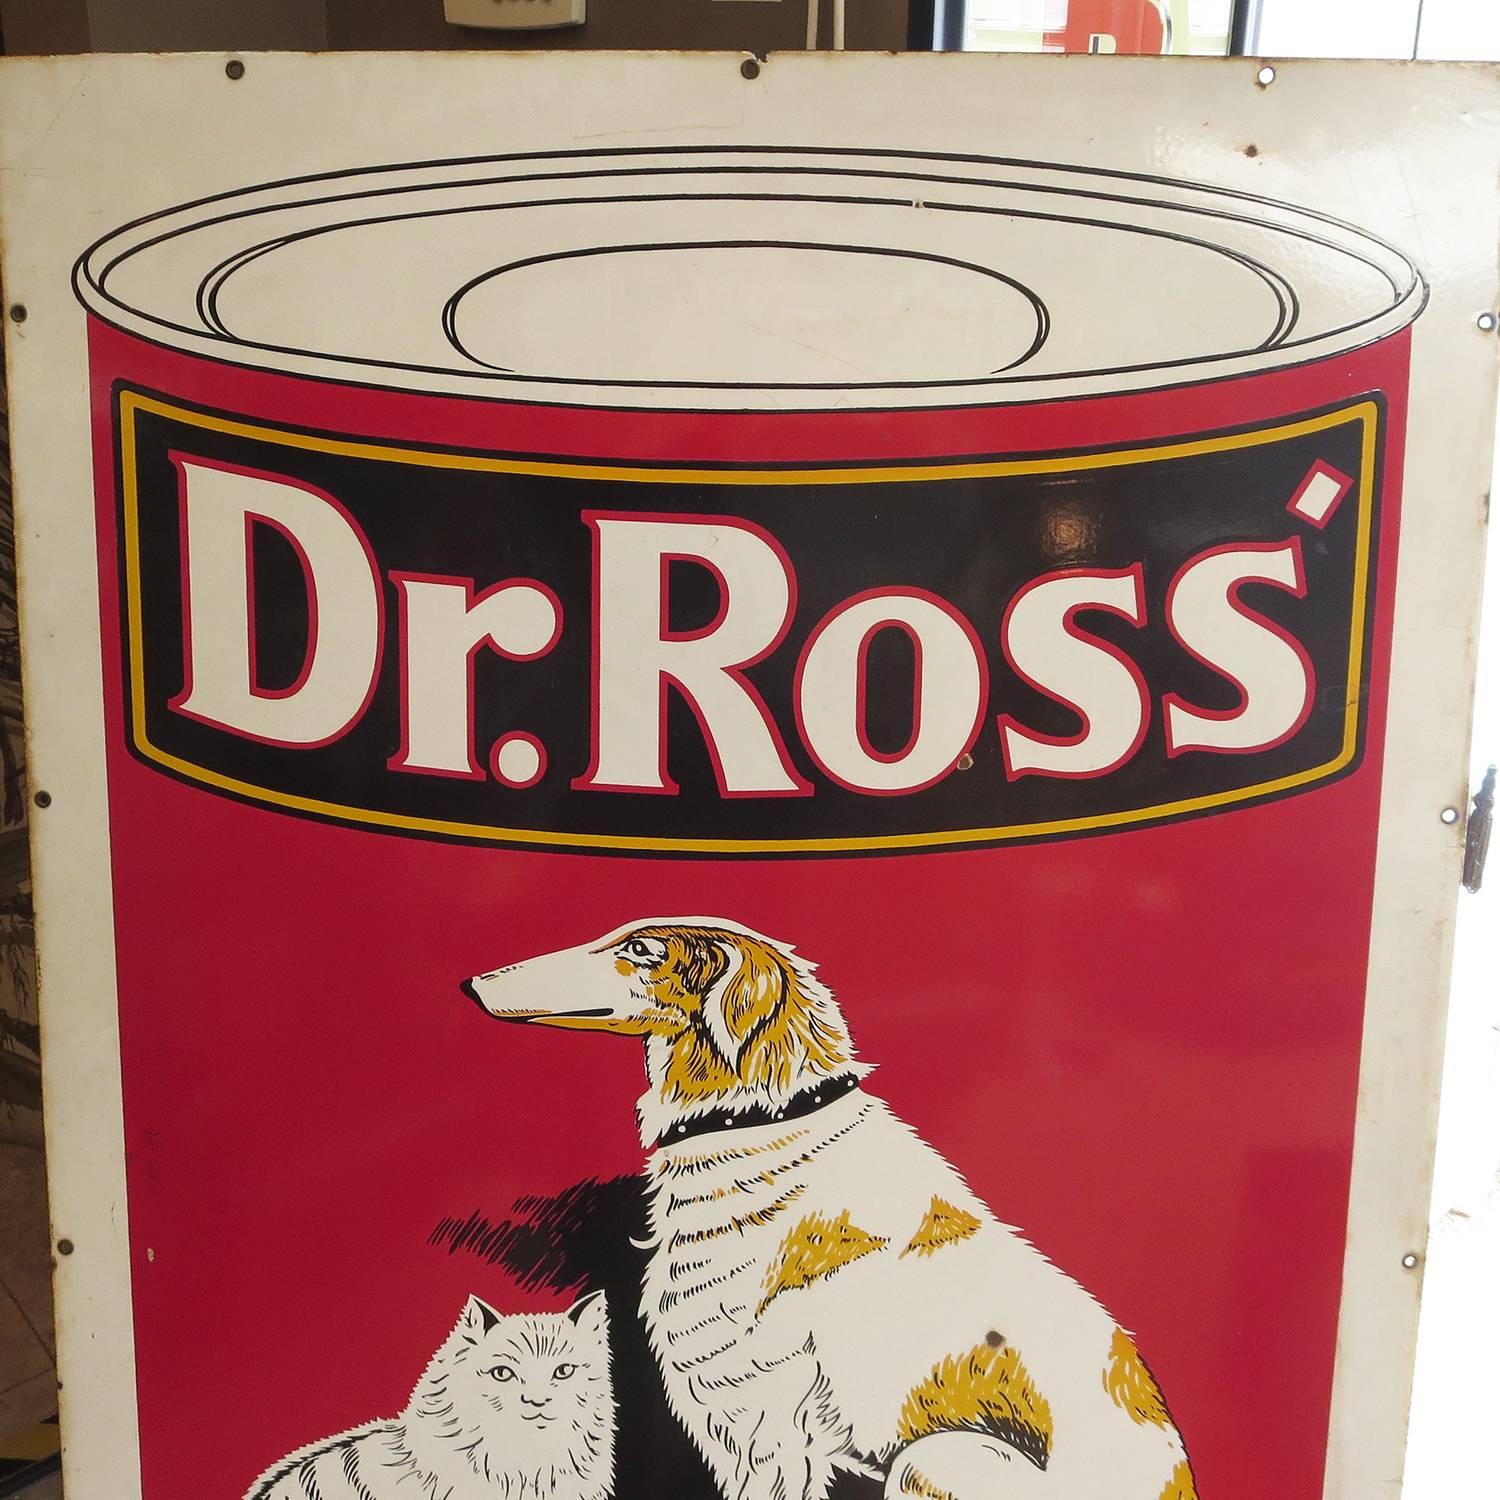 Founded in 1932, and closed in 1944, Dr. Ross dog and cat food was one of the largest pet food companies in California. This great sign illustrates one of the red cans the company offered. In brilliant baked porcelain enamel over steel, the large